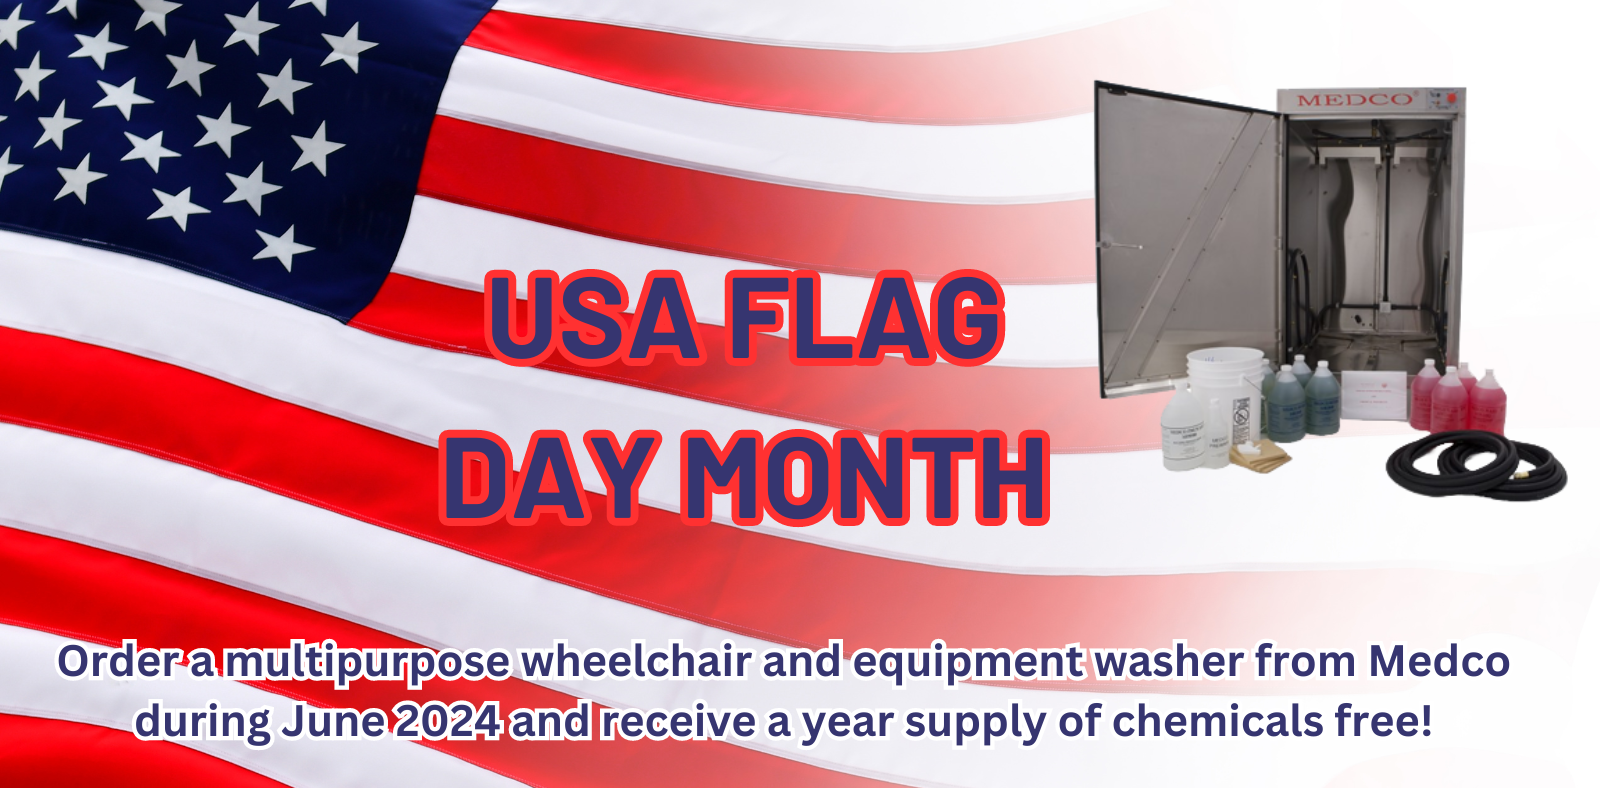 Order a multipurpose wheelchair and equipment washer from Medco during June 2024 and receive a year supply of chemicals free!